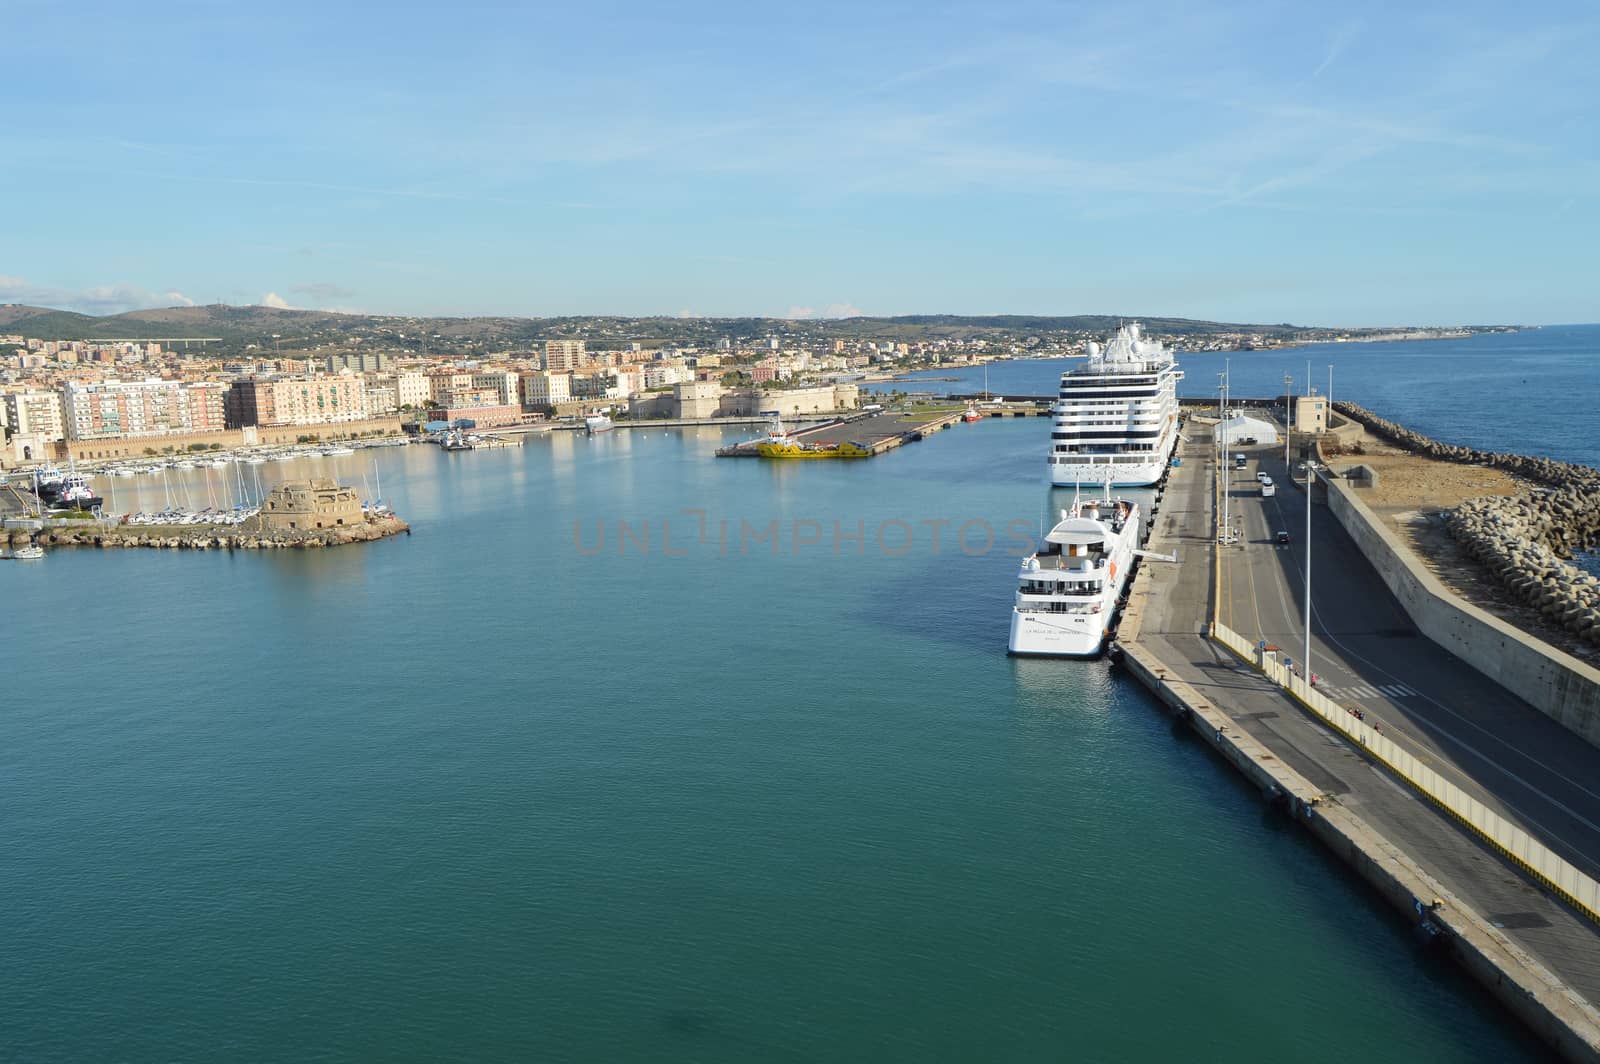 View of stone and concrete breakwaters along the pier, cruise liners and a panorama of the port of Civitavecchia, October 7, 2018 by claire_lucia